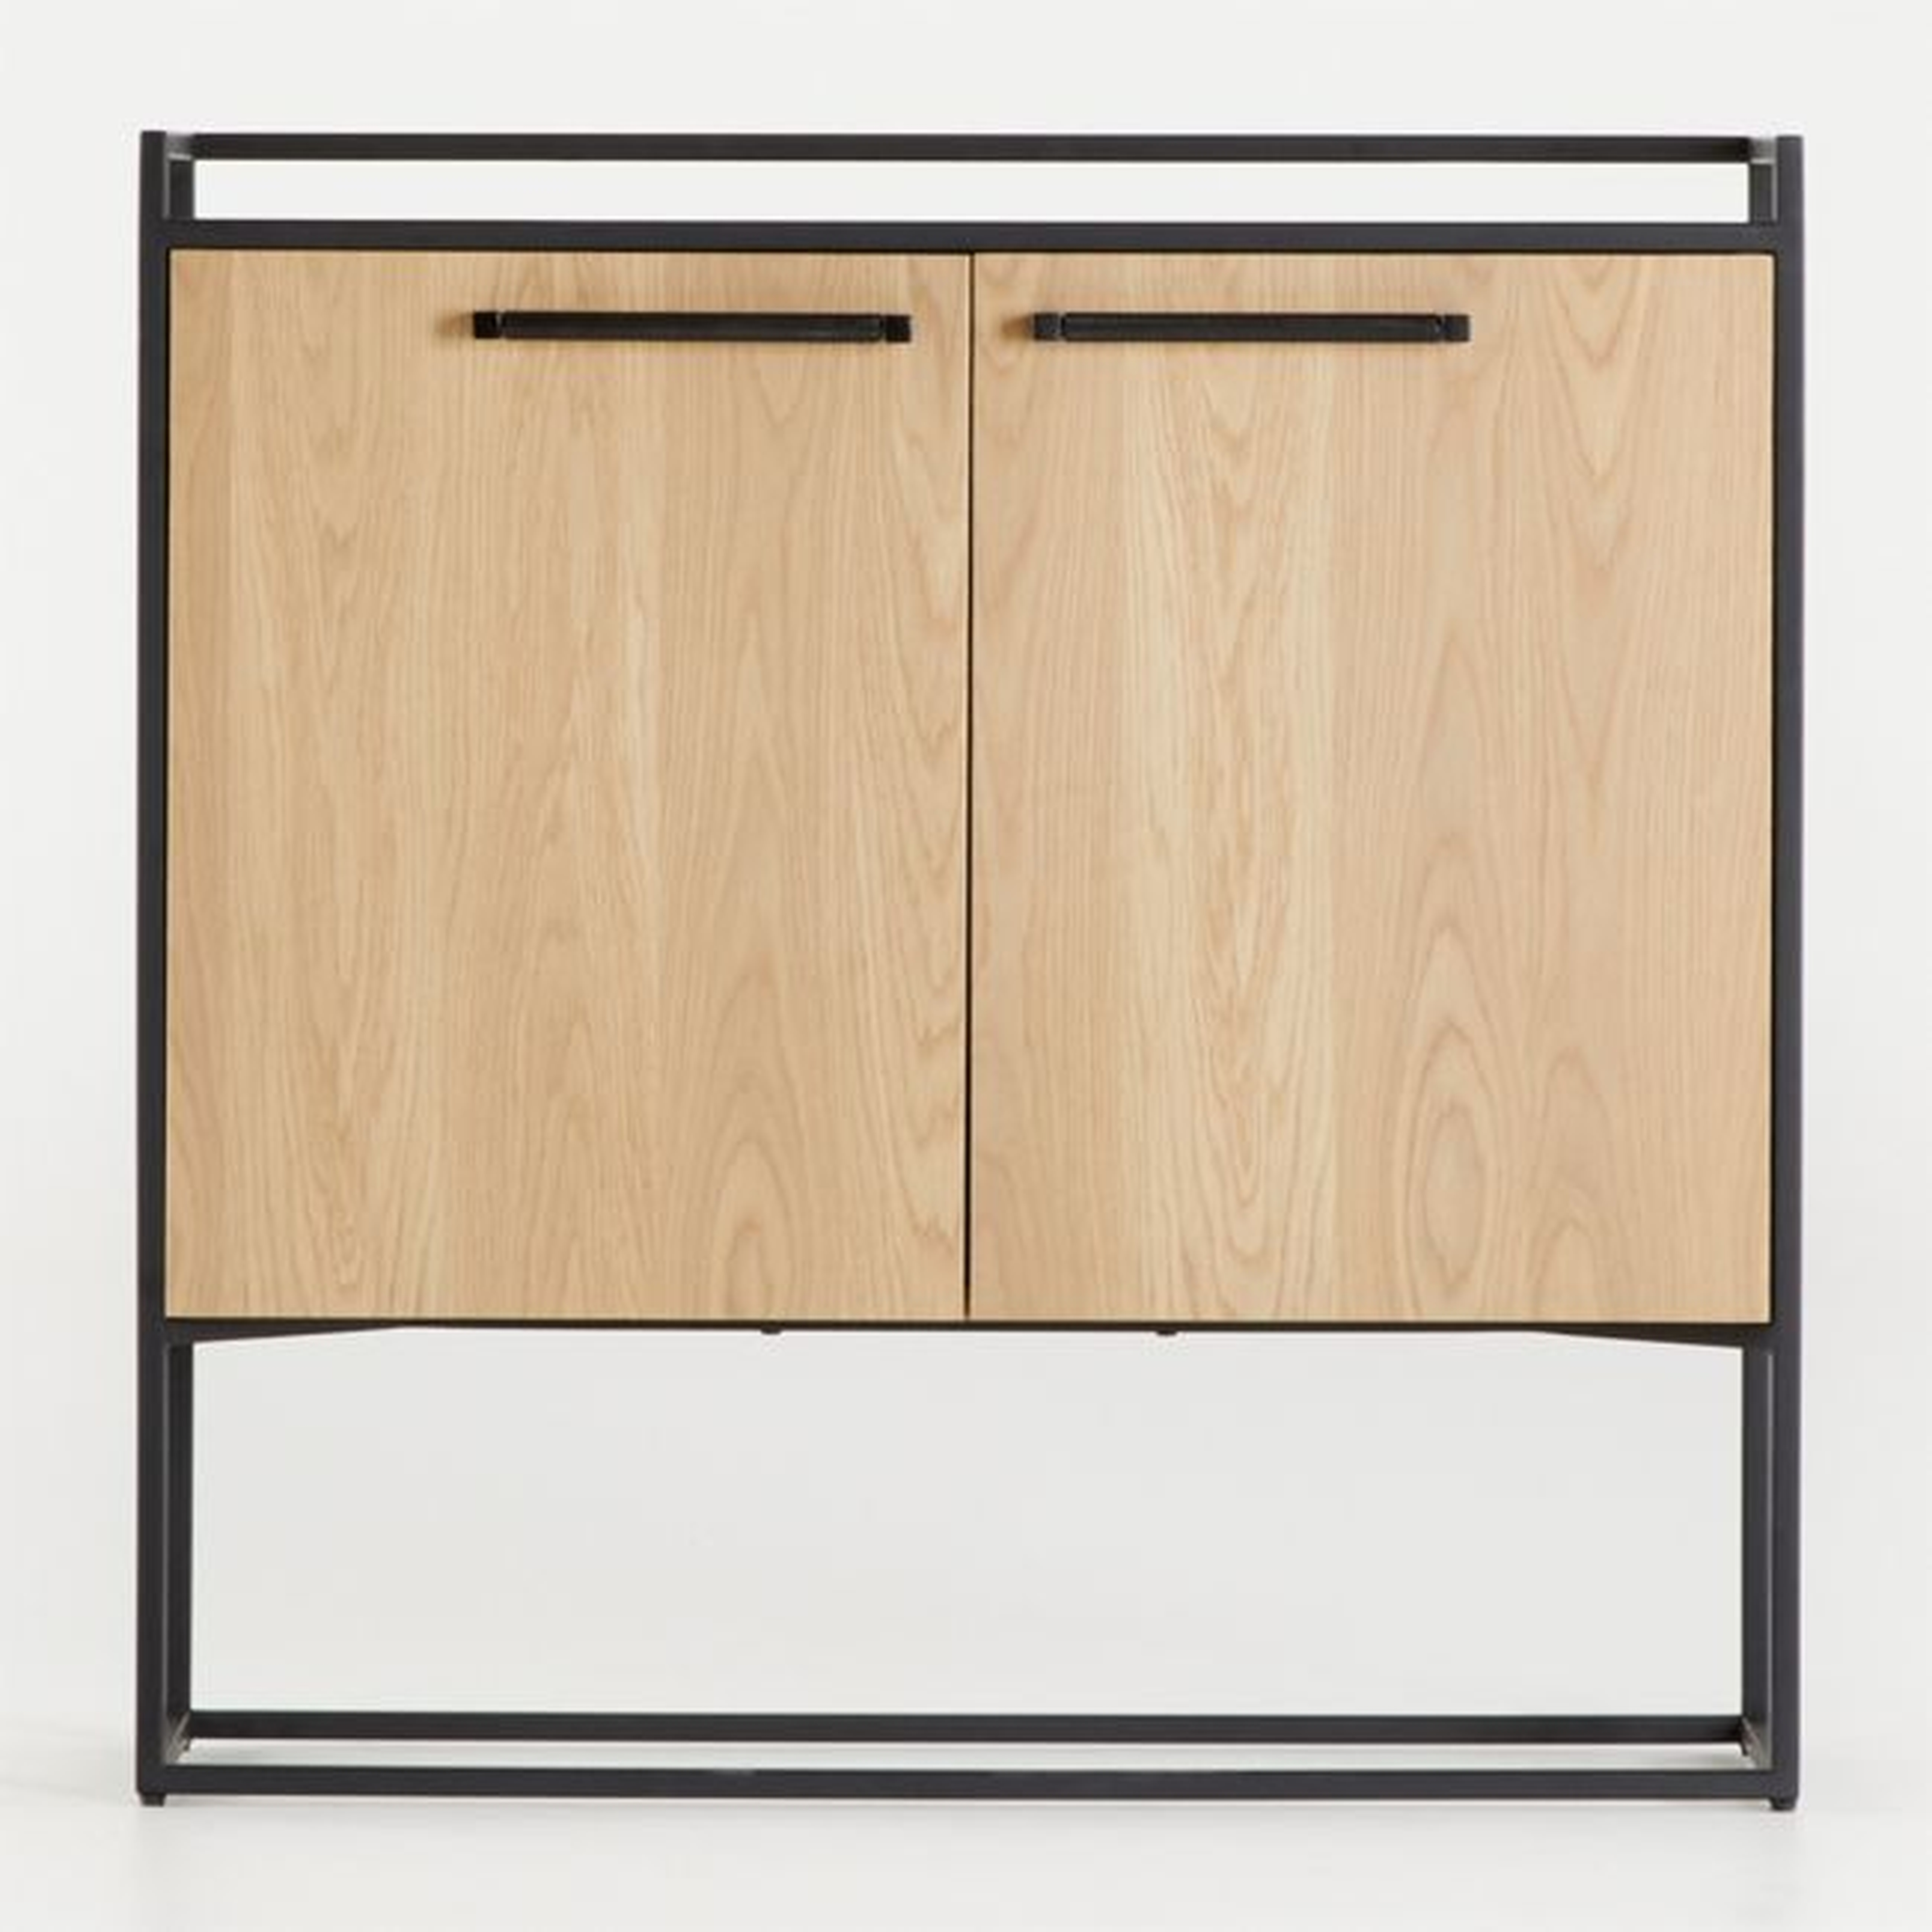 Cage Entryway Cabinet - Crate and Barrel